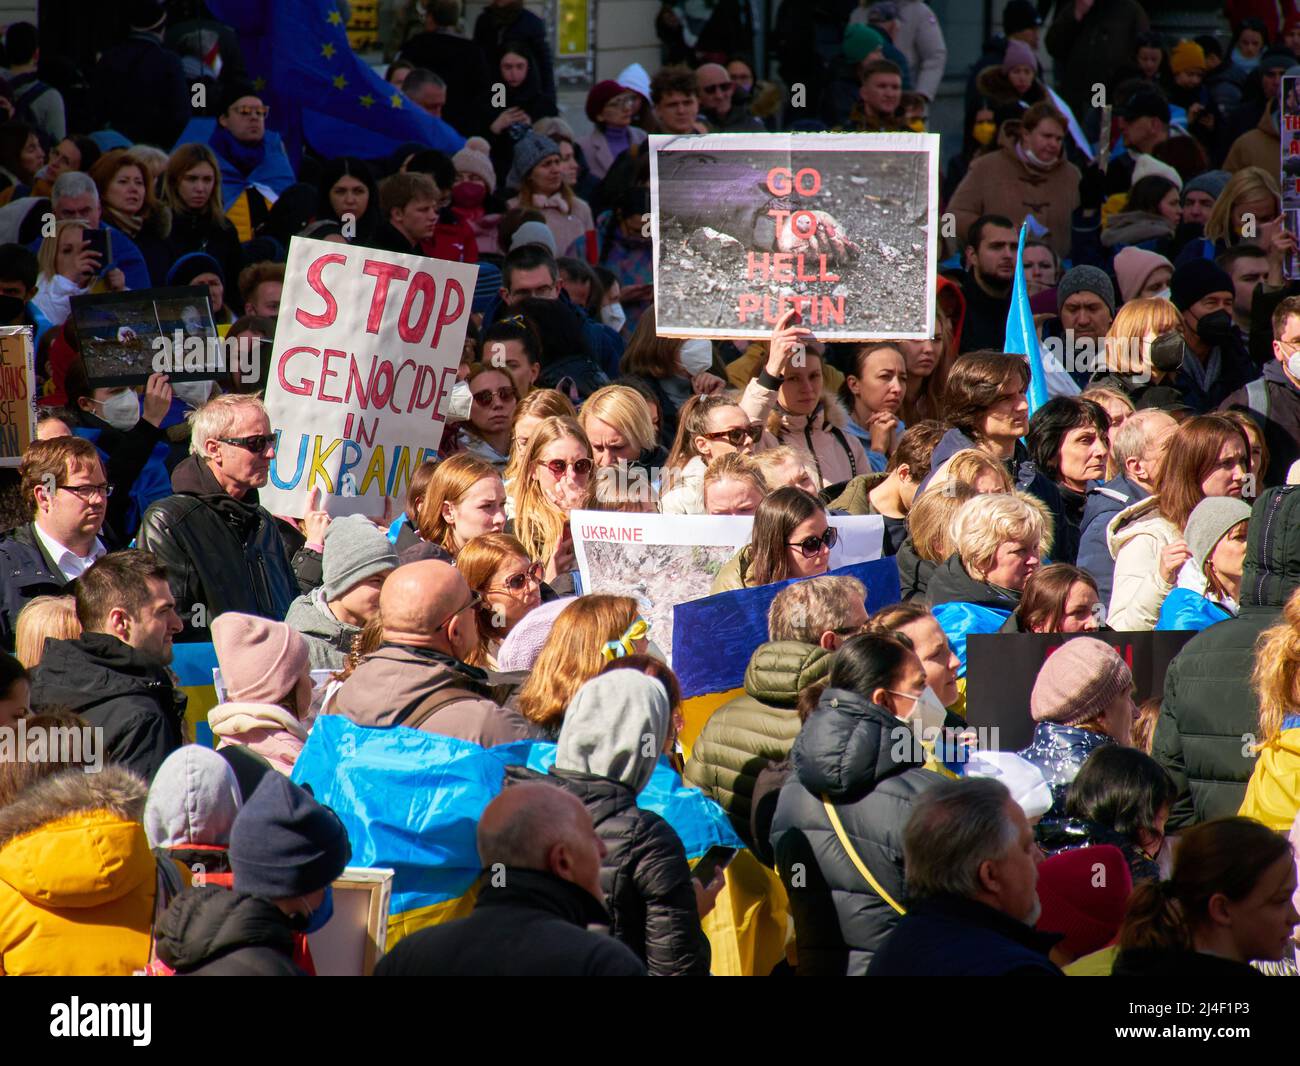 Demonstration Against War and Russian Agression, to stop violence in Bucha, Mariupol In Ukraine. Munich - April 2022 Stock Photo